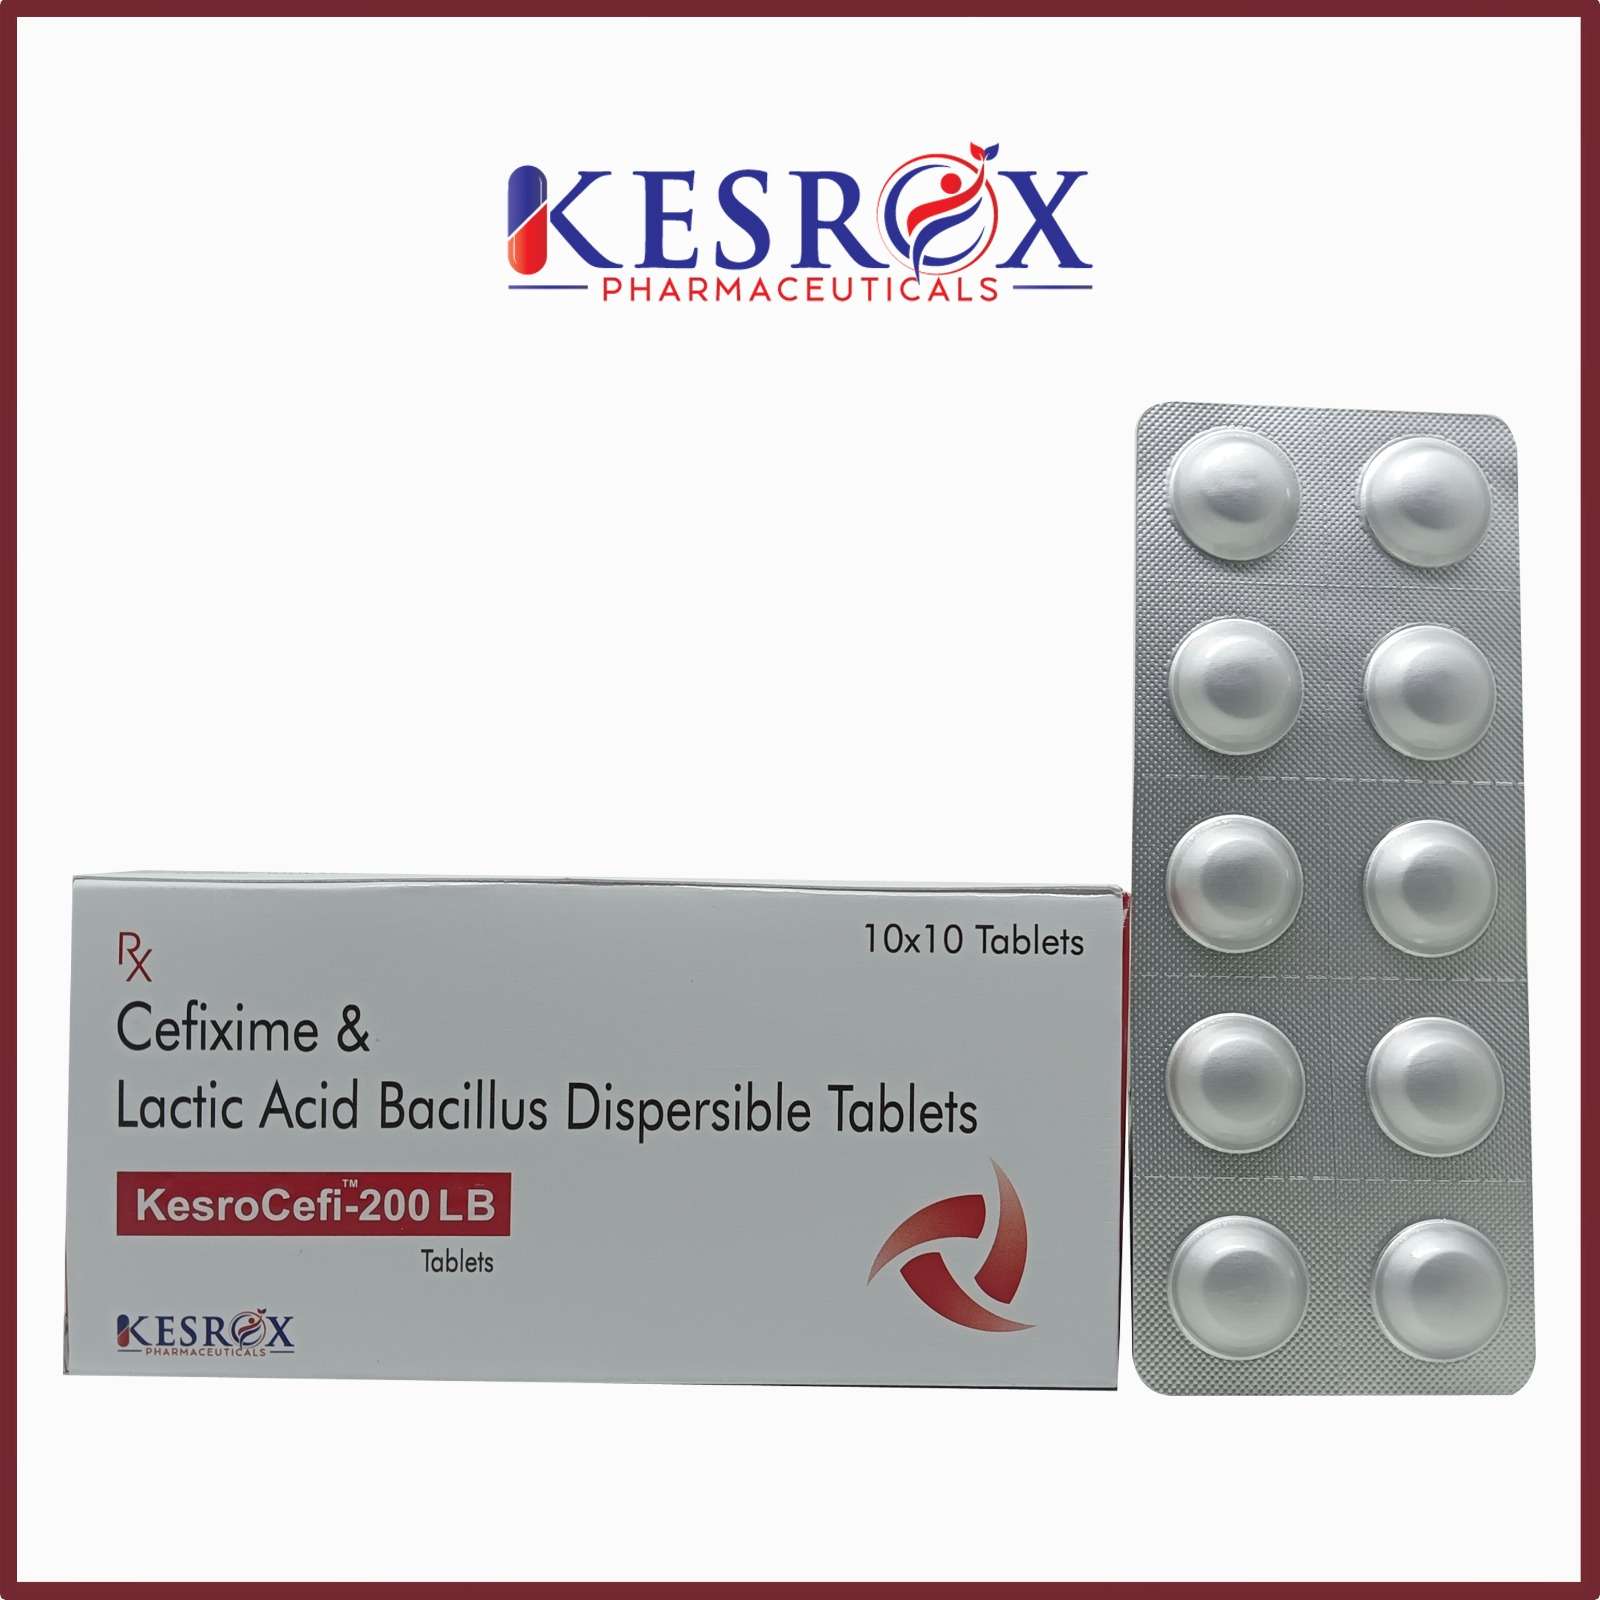 cefixime trihydrate 200 mg & lactic acid bacillus 60 million spores  dispersiable  tablet